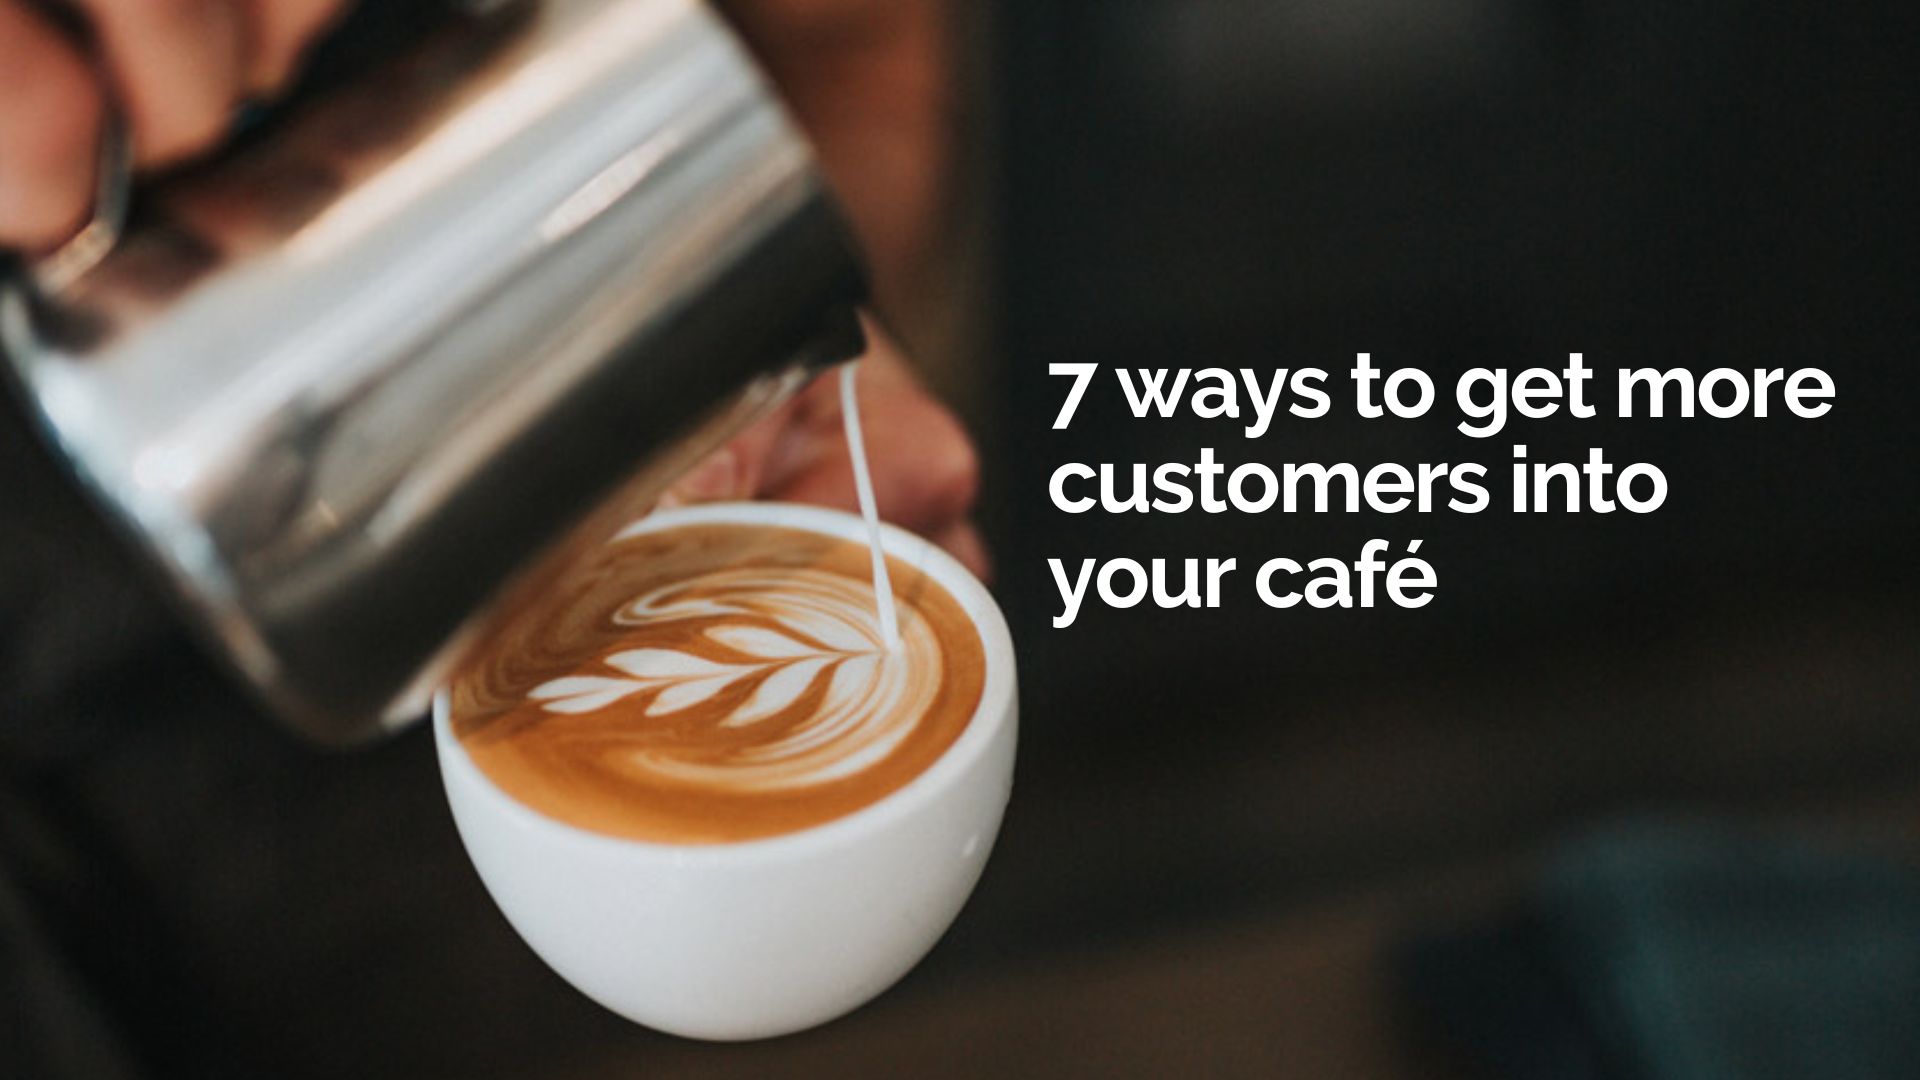 7 ways to get more customers into your café